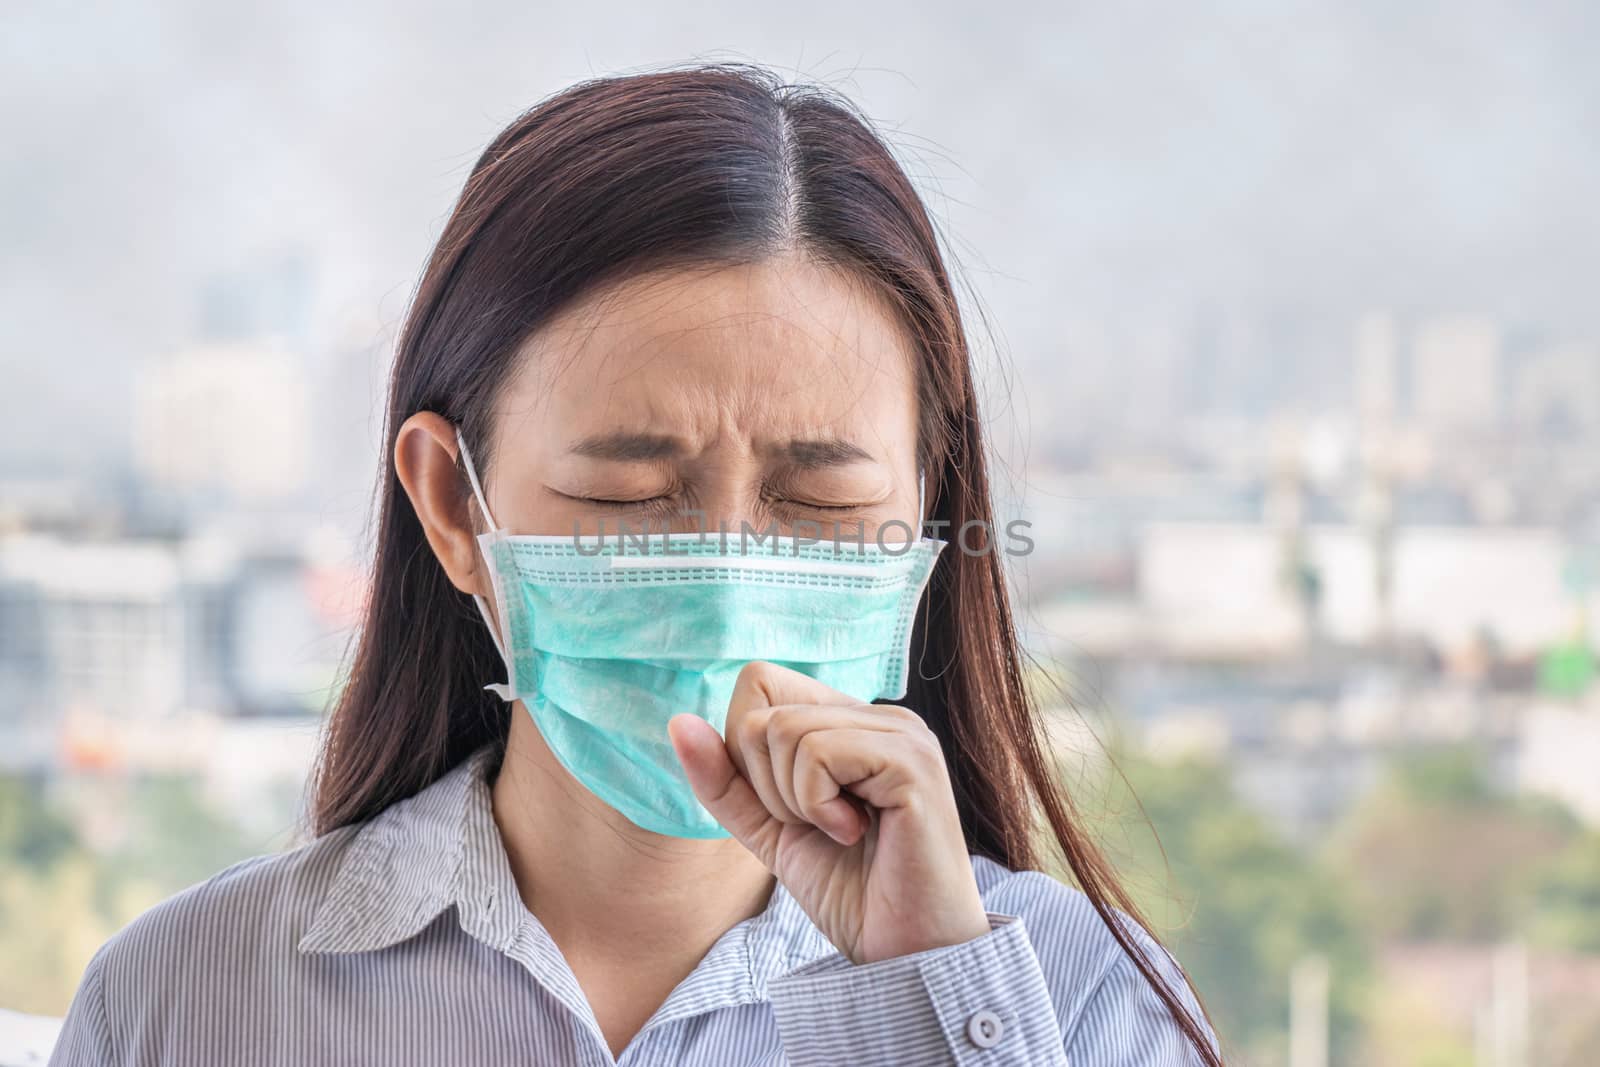 PM2.5. people feeling sick from air pollution, environment has harmful or poisonous effects. woman in the city wearing face mask to protect herself because level of pollution in the air is rising.